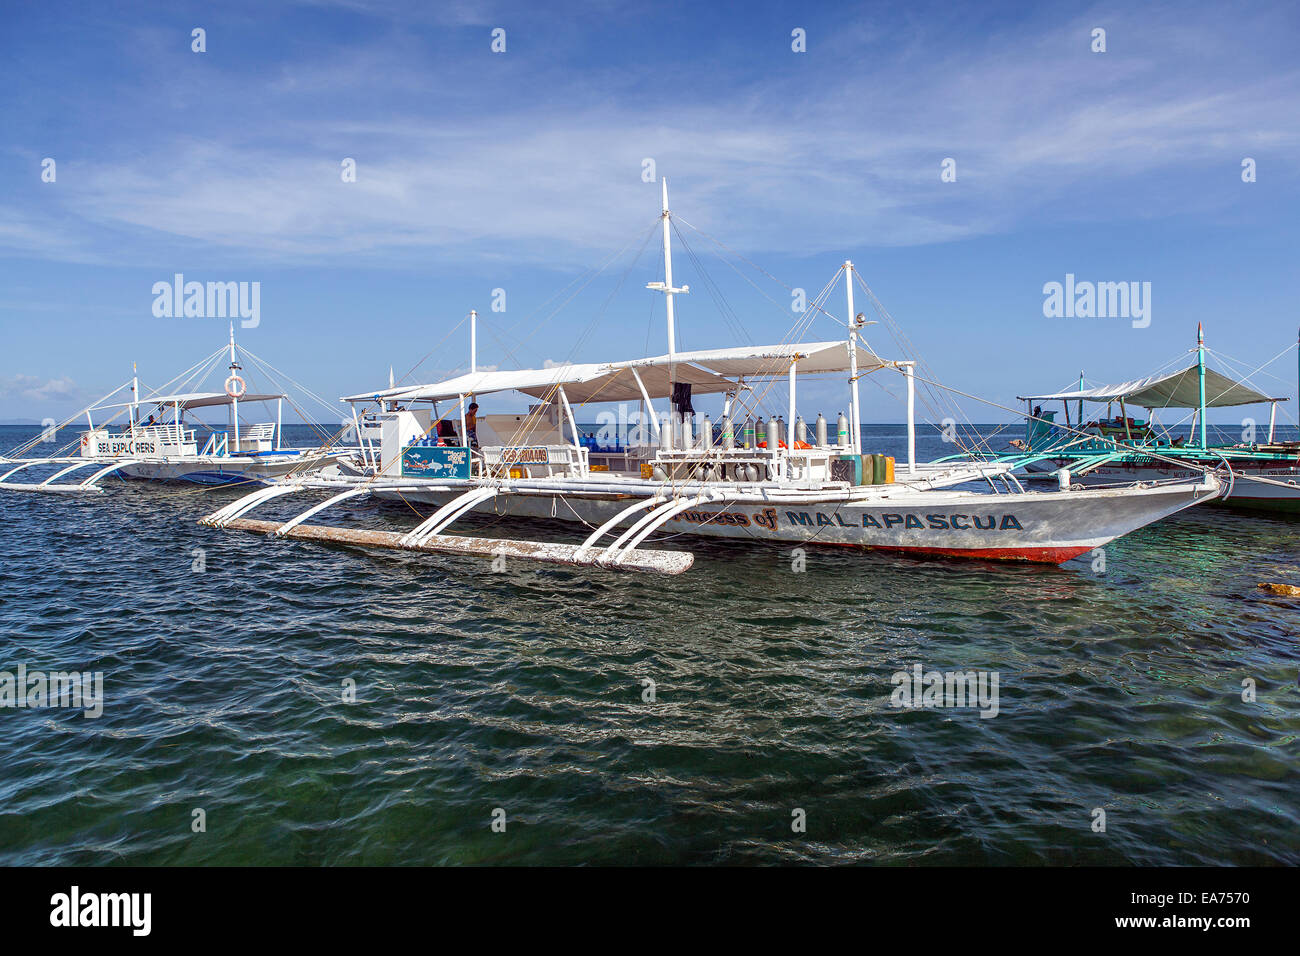 Outrigger scuba diving boats at dock in Daanbantayan, Cebu Island, Philippines. This is a remote and popular diving location. Stock Photo